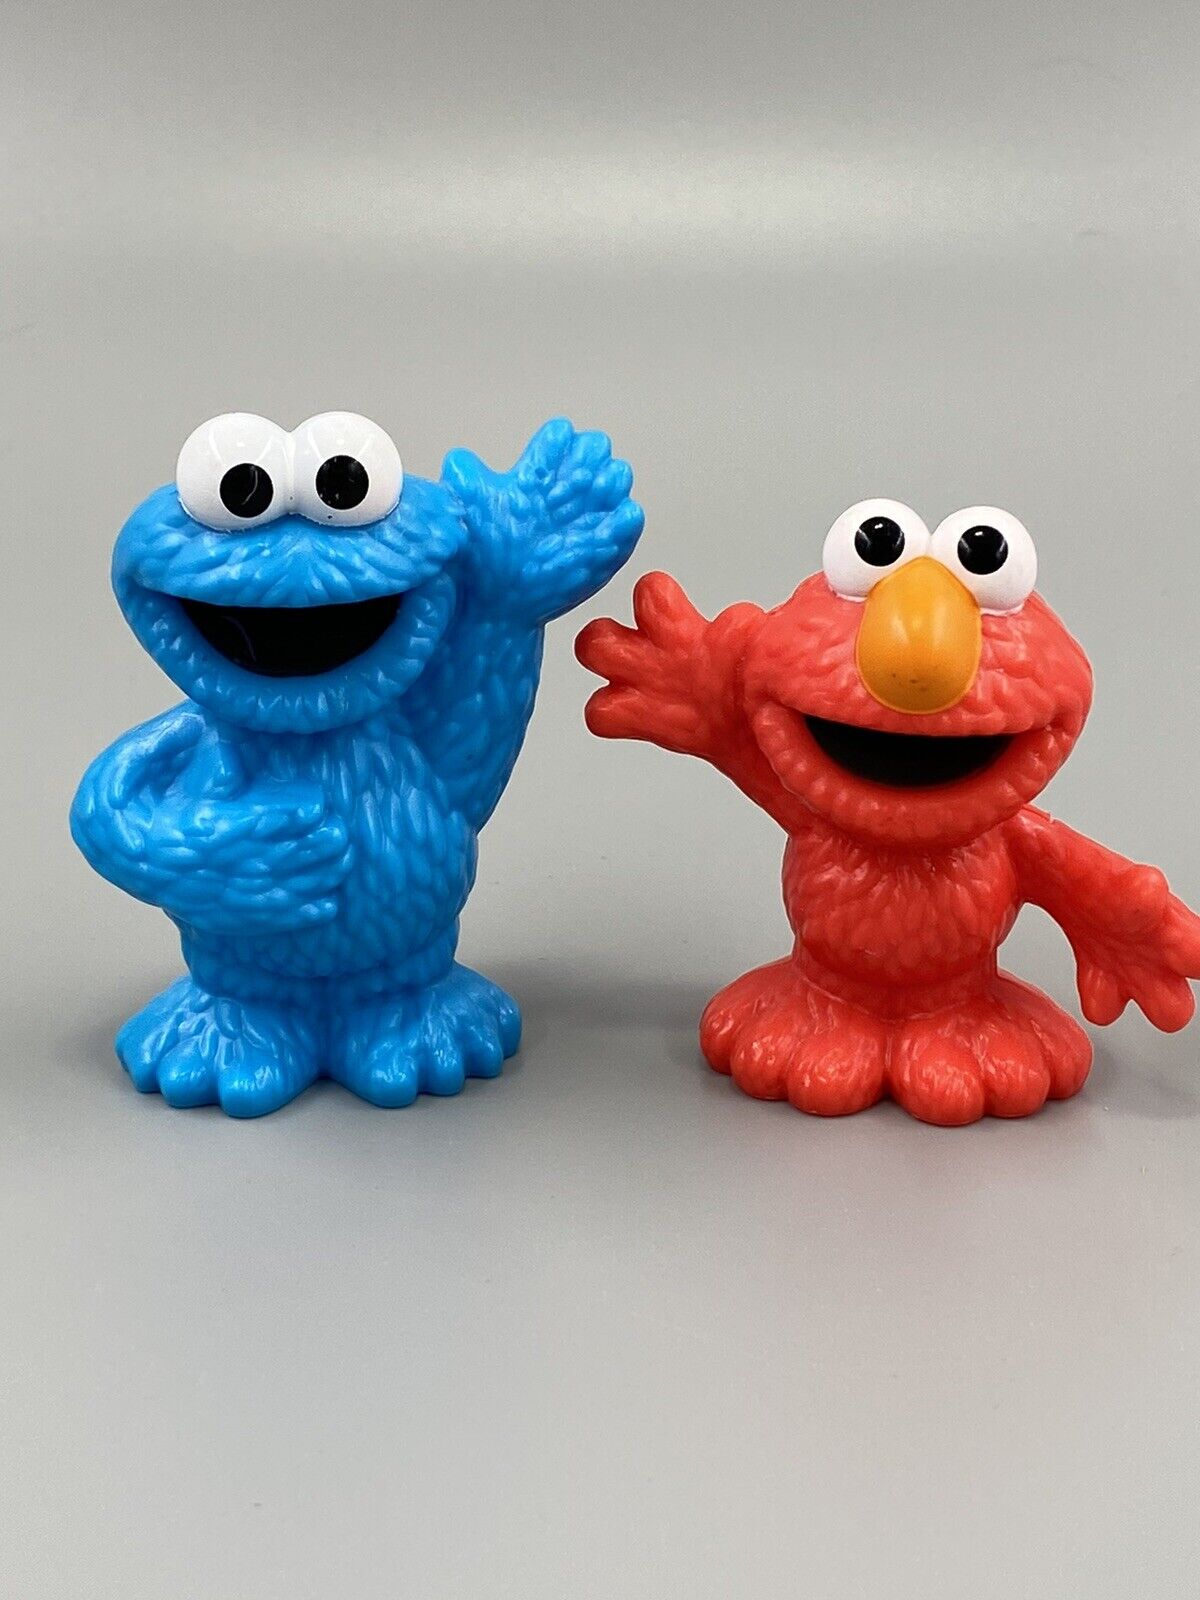 2 Sesame Street 3” Plastic Toy Figures Elmo and Cookie Monster Cake Toppers